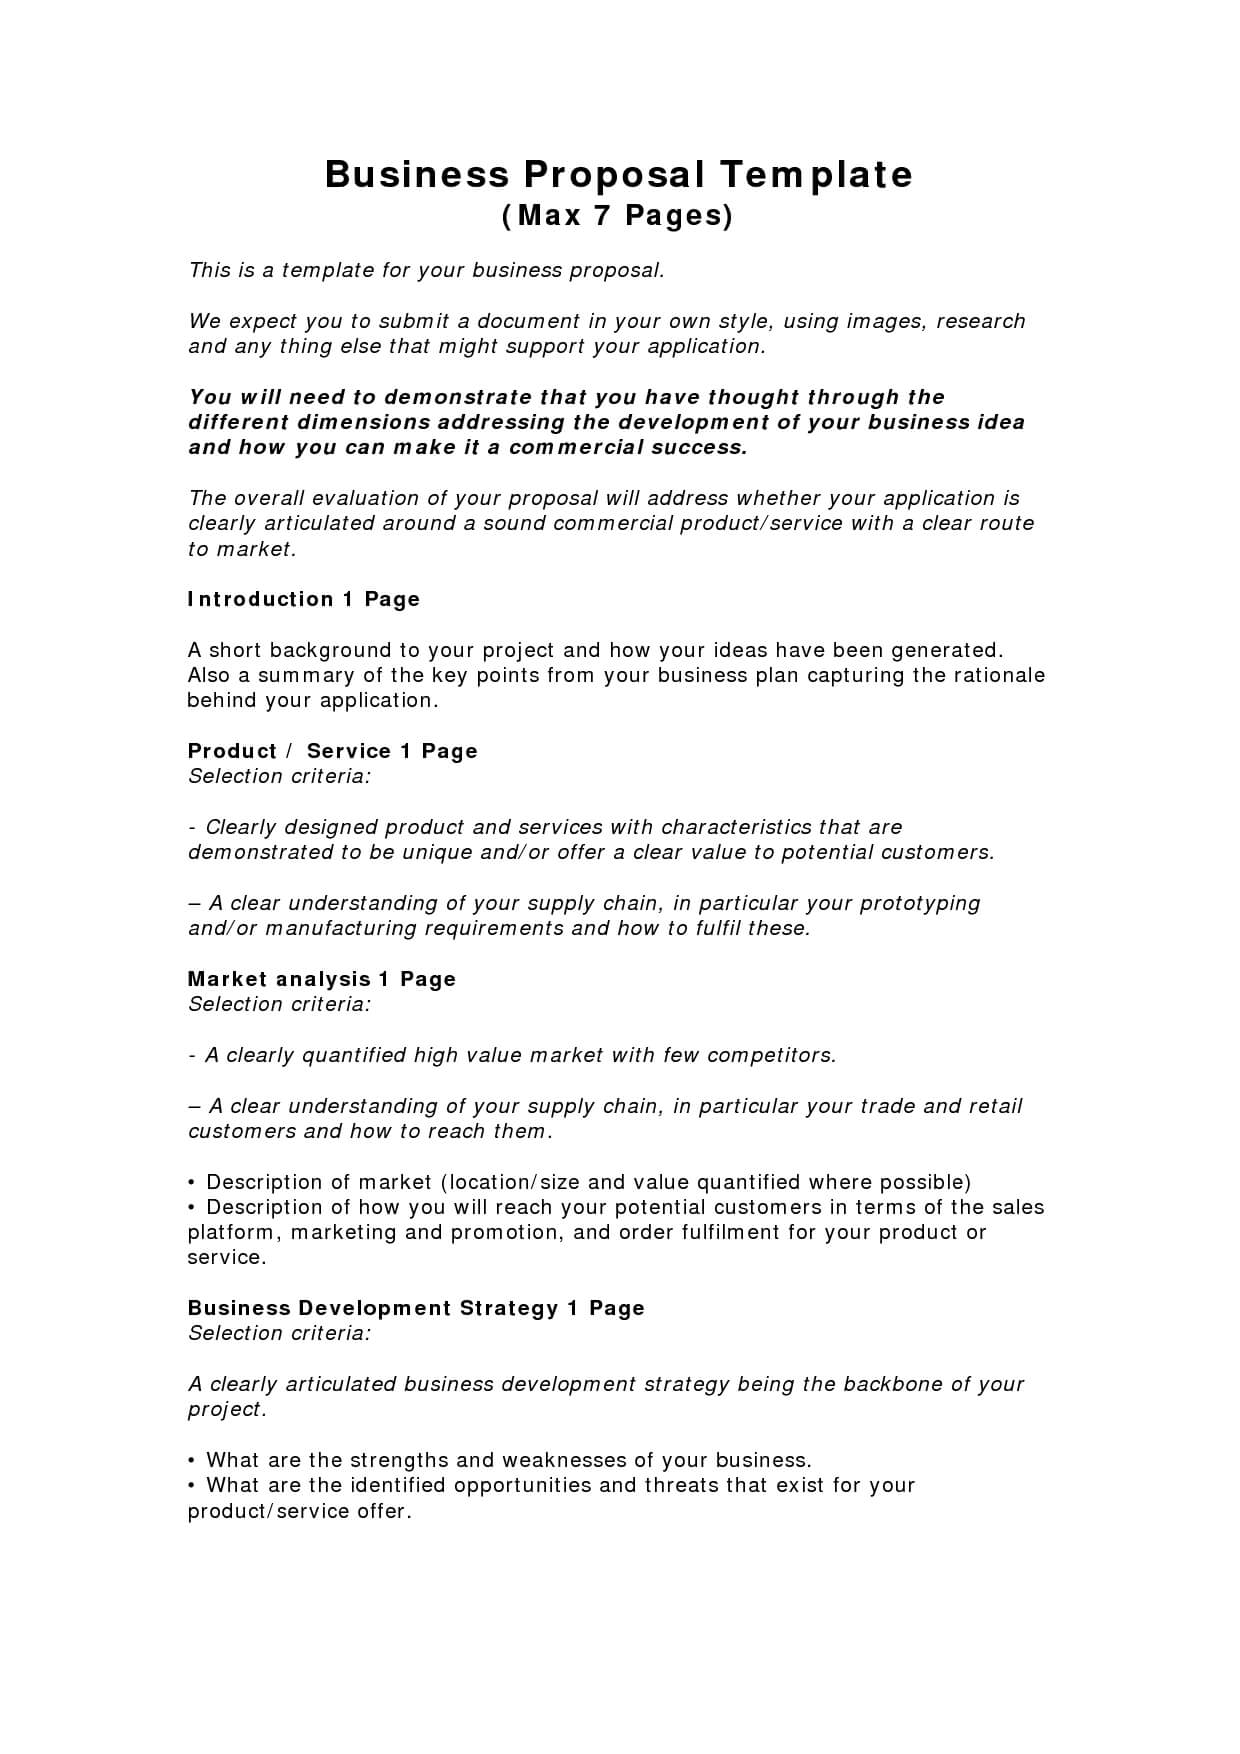 Business Proposal Templates Examples | Business Proposal Throughout Free Business Proposal Template Ms Word